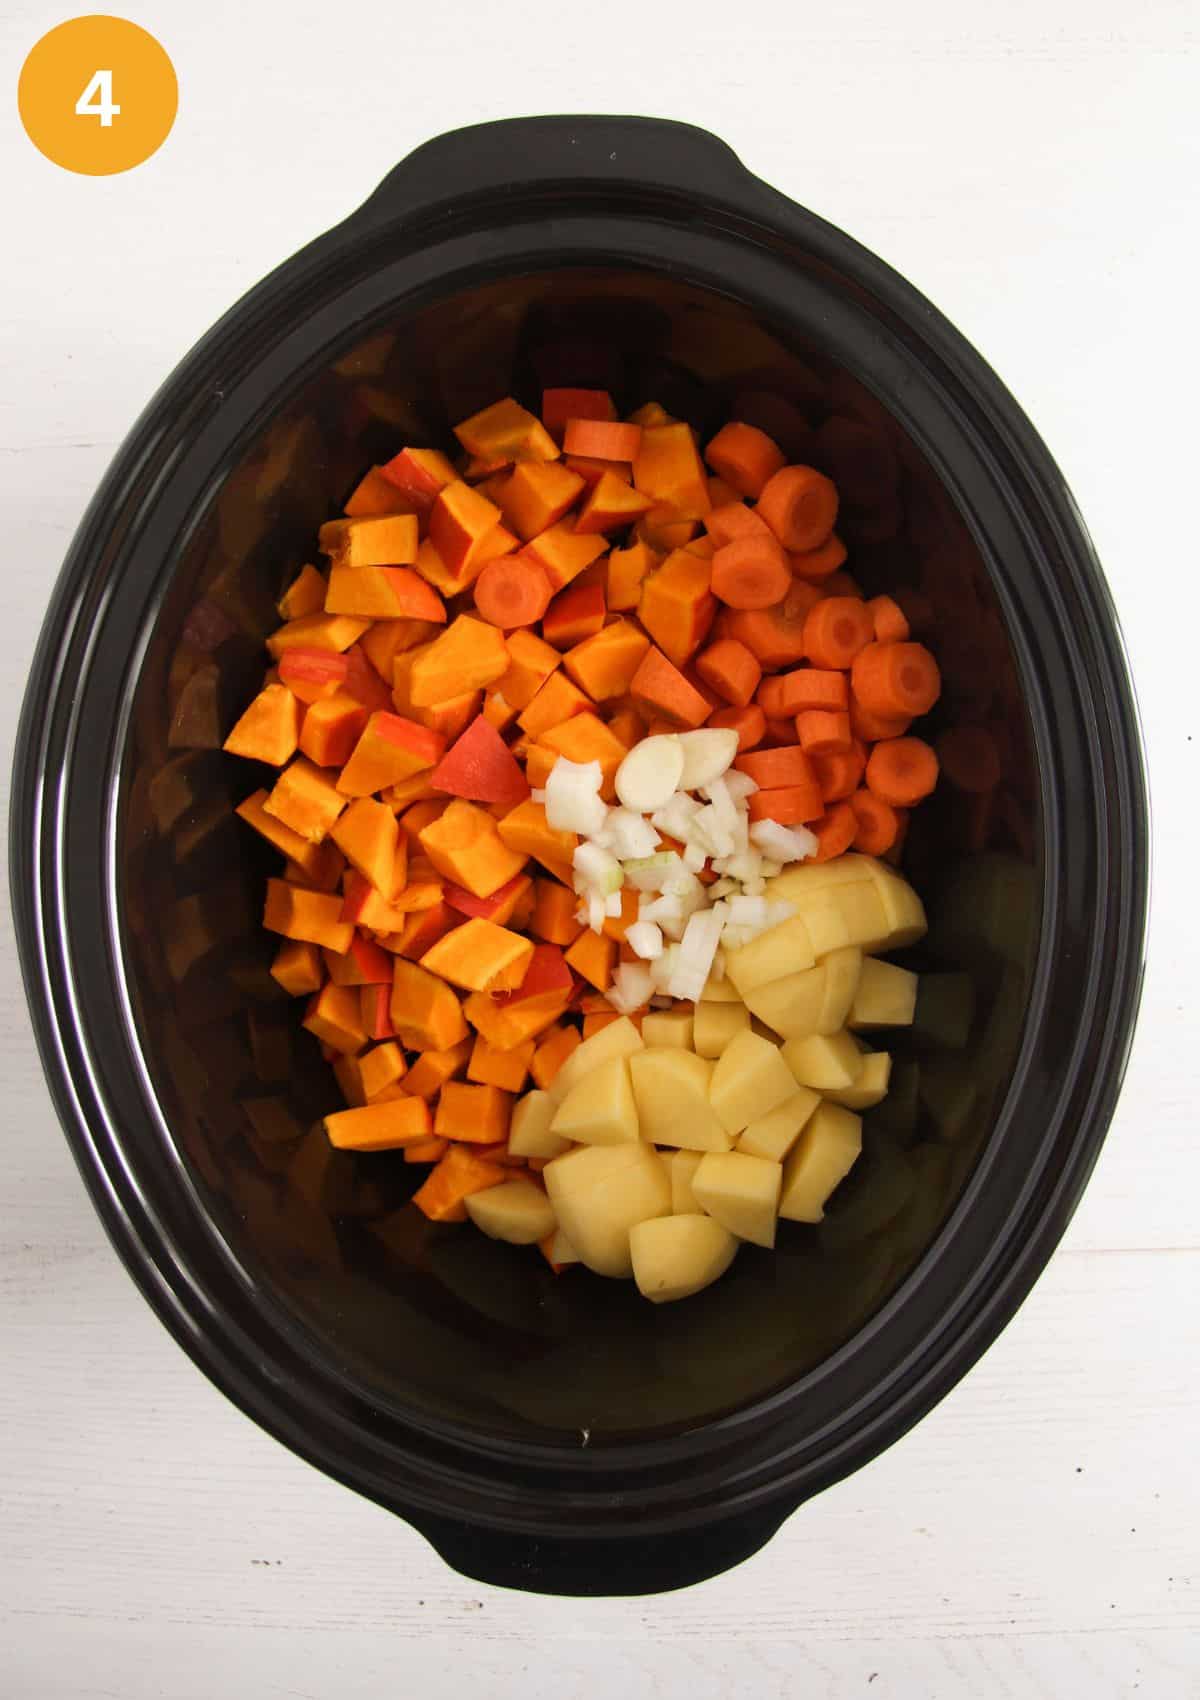 chopped vegetables in a slow cooker before cooking.